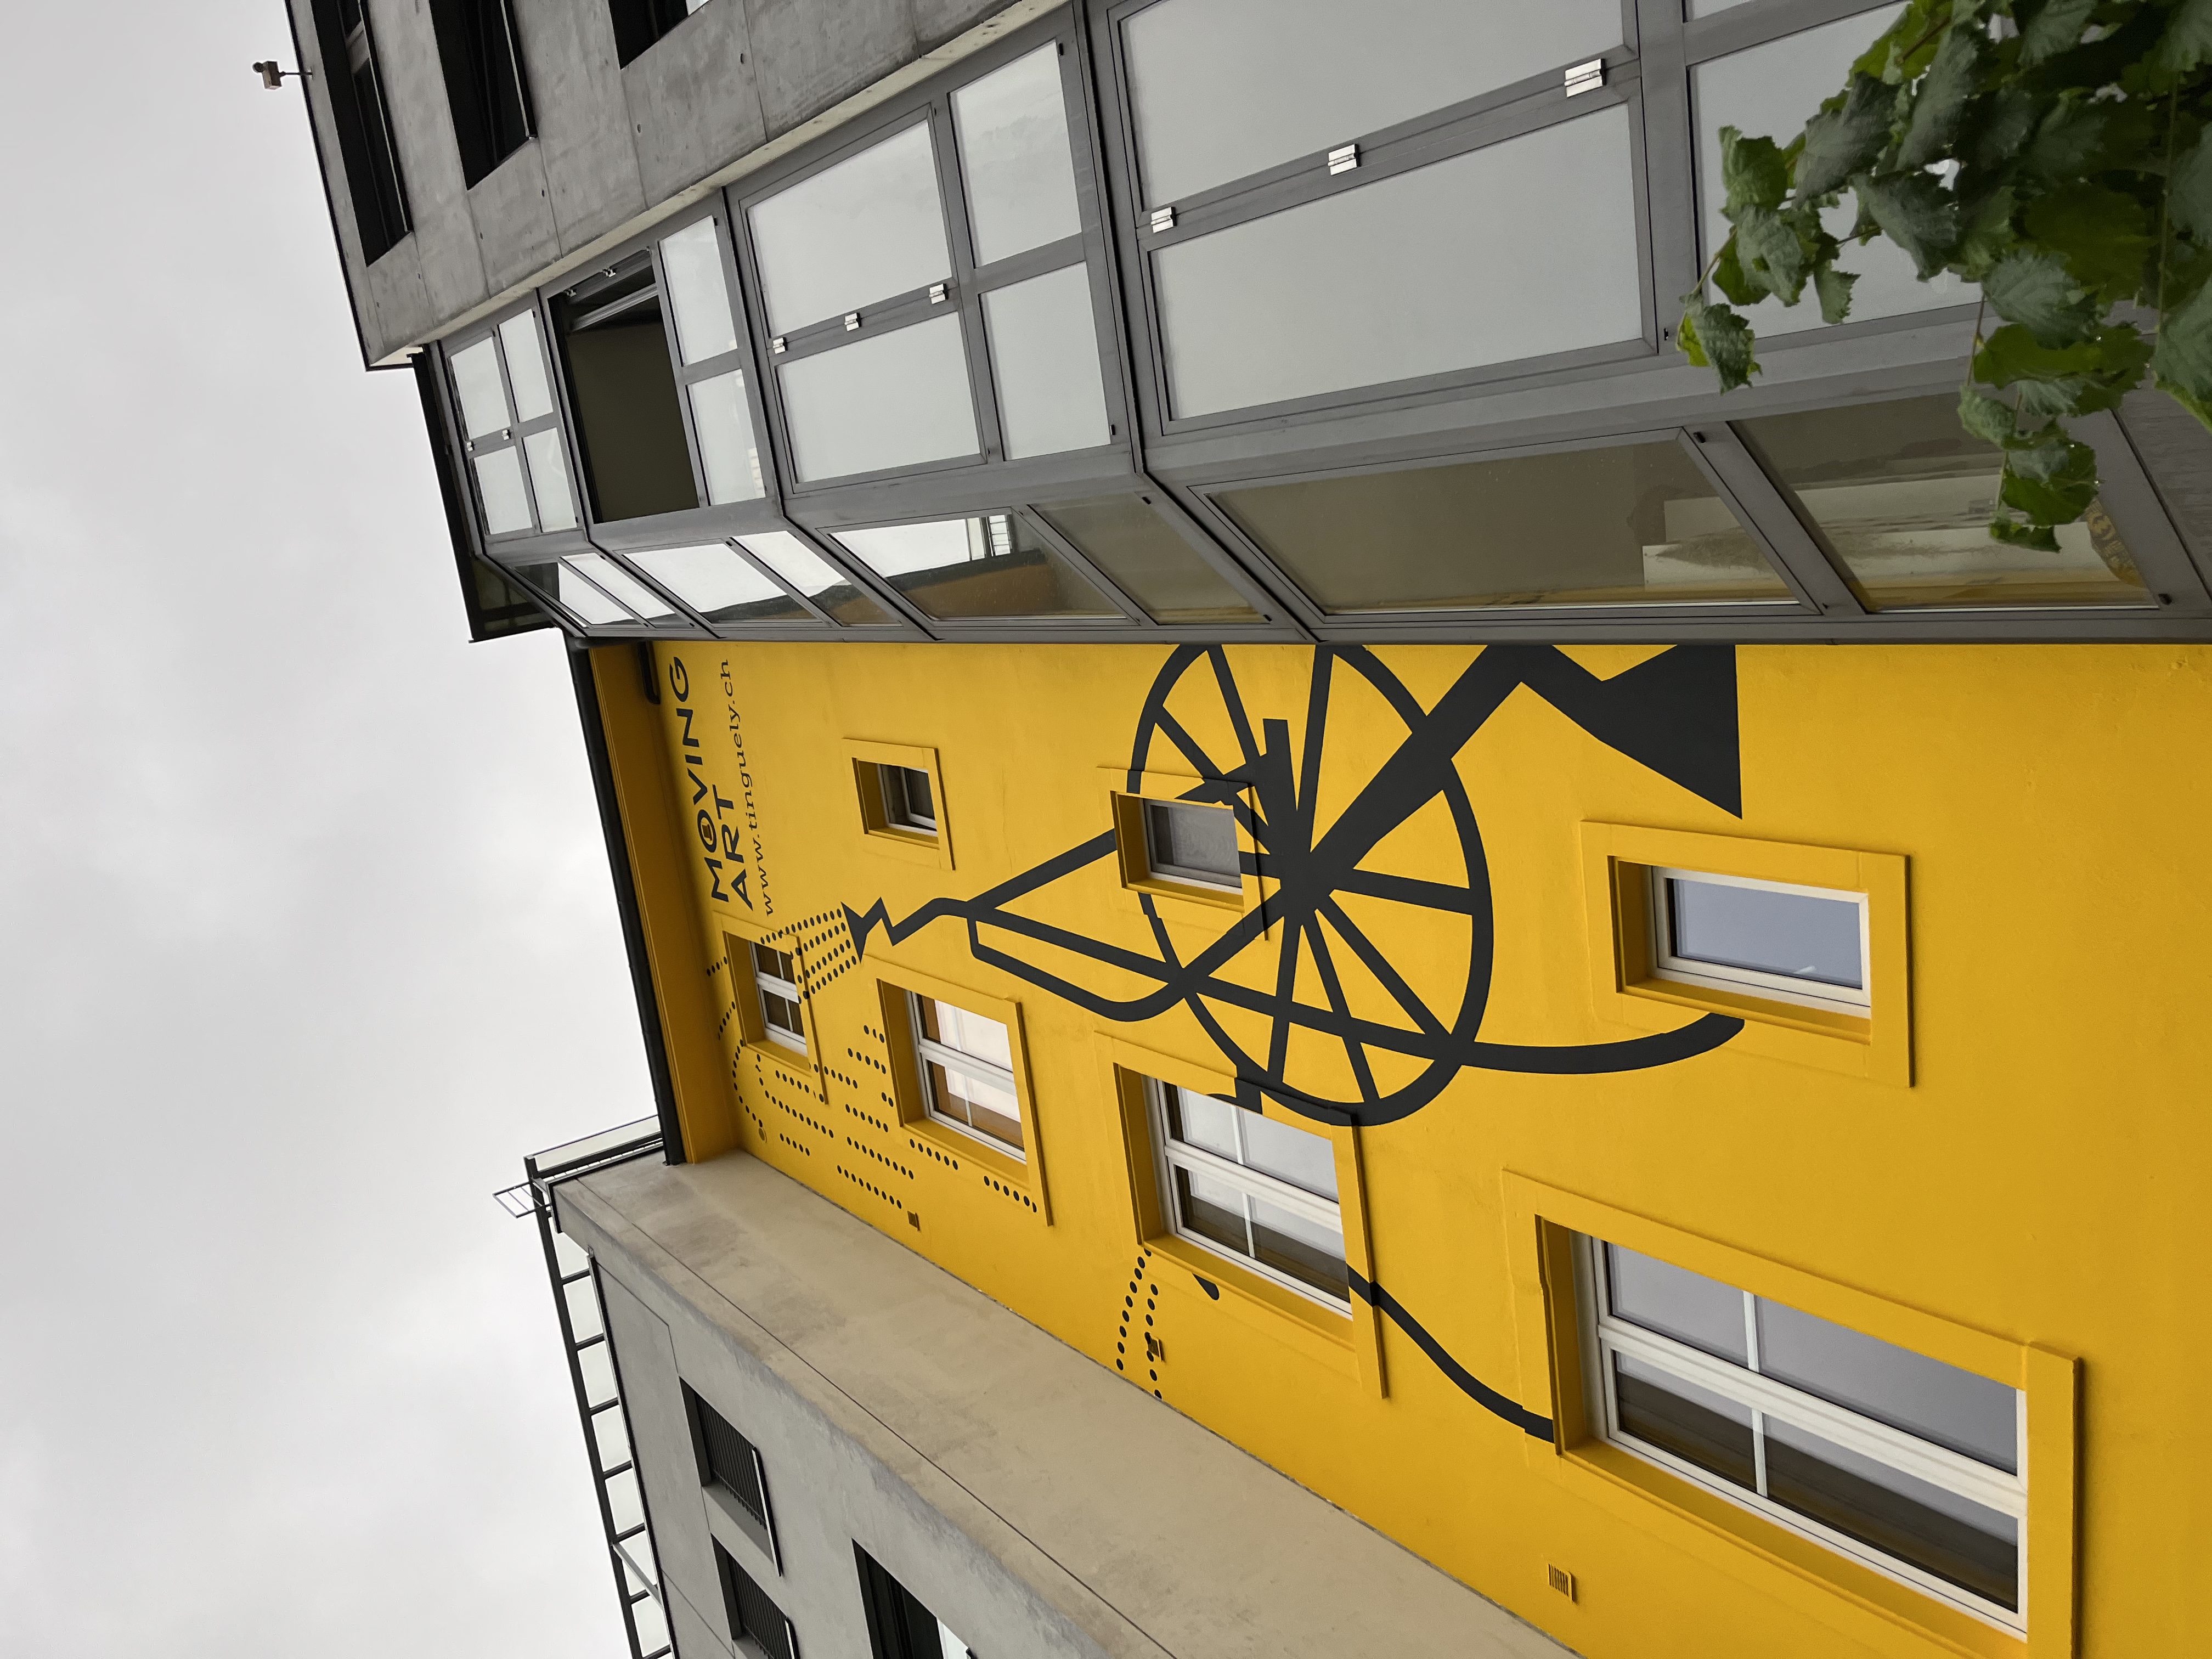 https://www.sarahweishaupt.ch/media/pages/home/illustration-fassade-fuer-museum-tinguely/f95a6fd702-1656364119/3627dabe-d8cf-46c8-b0ba-add298770446.jpeg